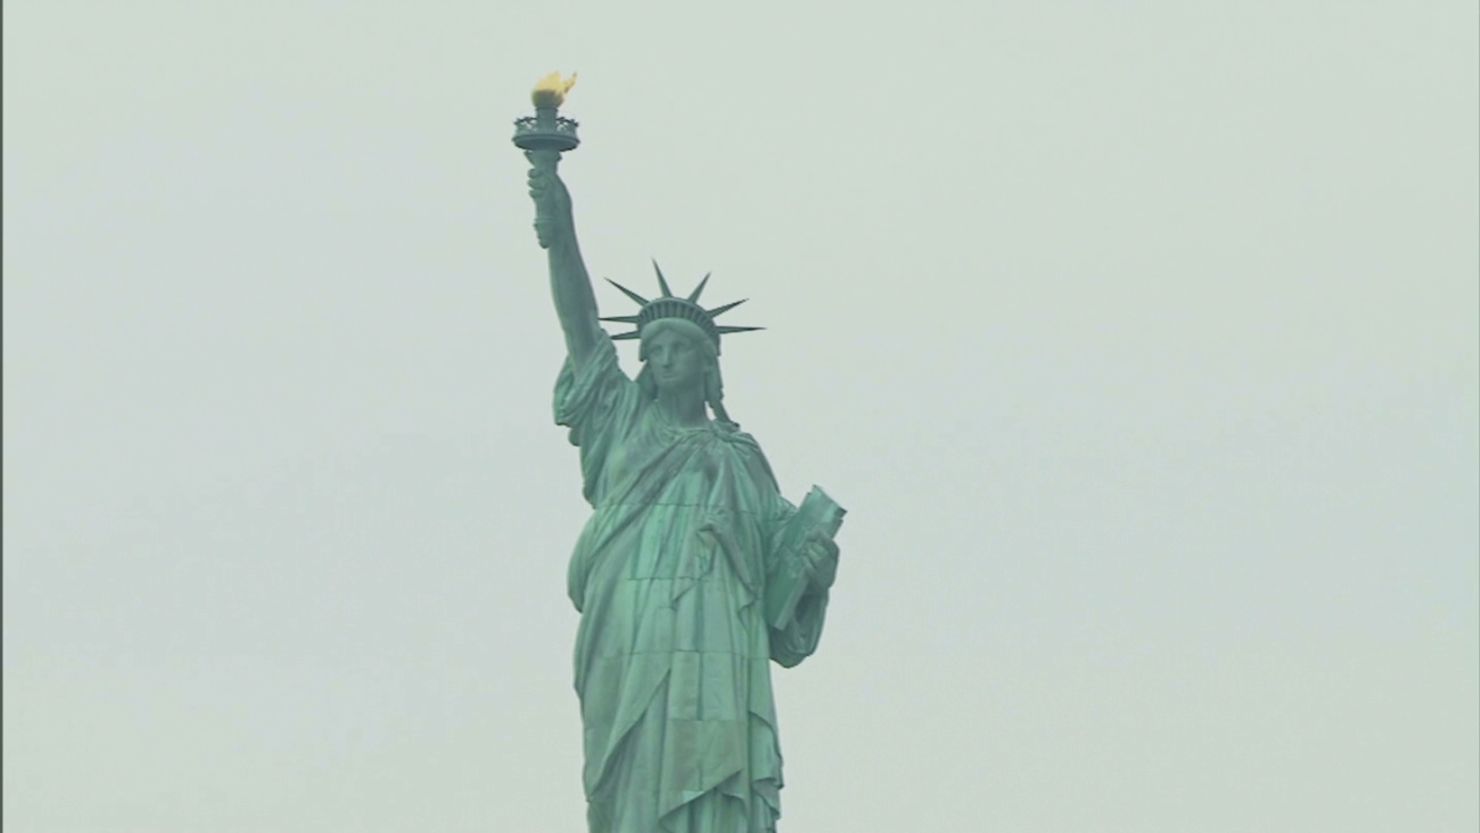 The Statue of Liberty has enough infrastructure damage to remain closed.